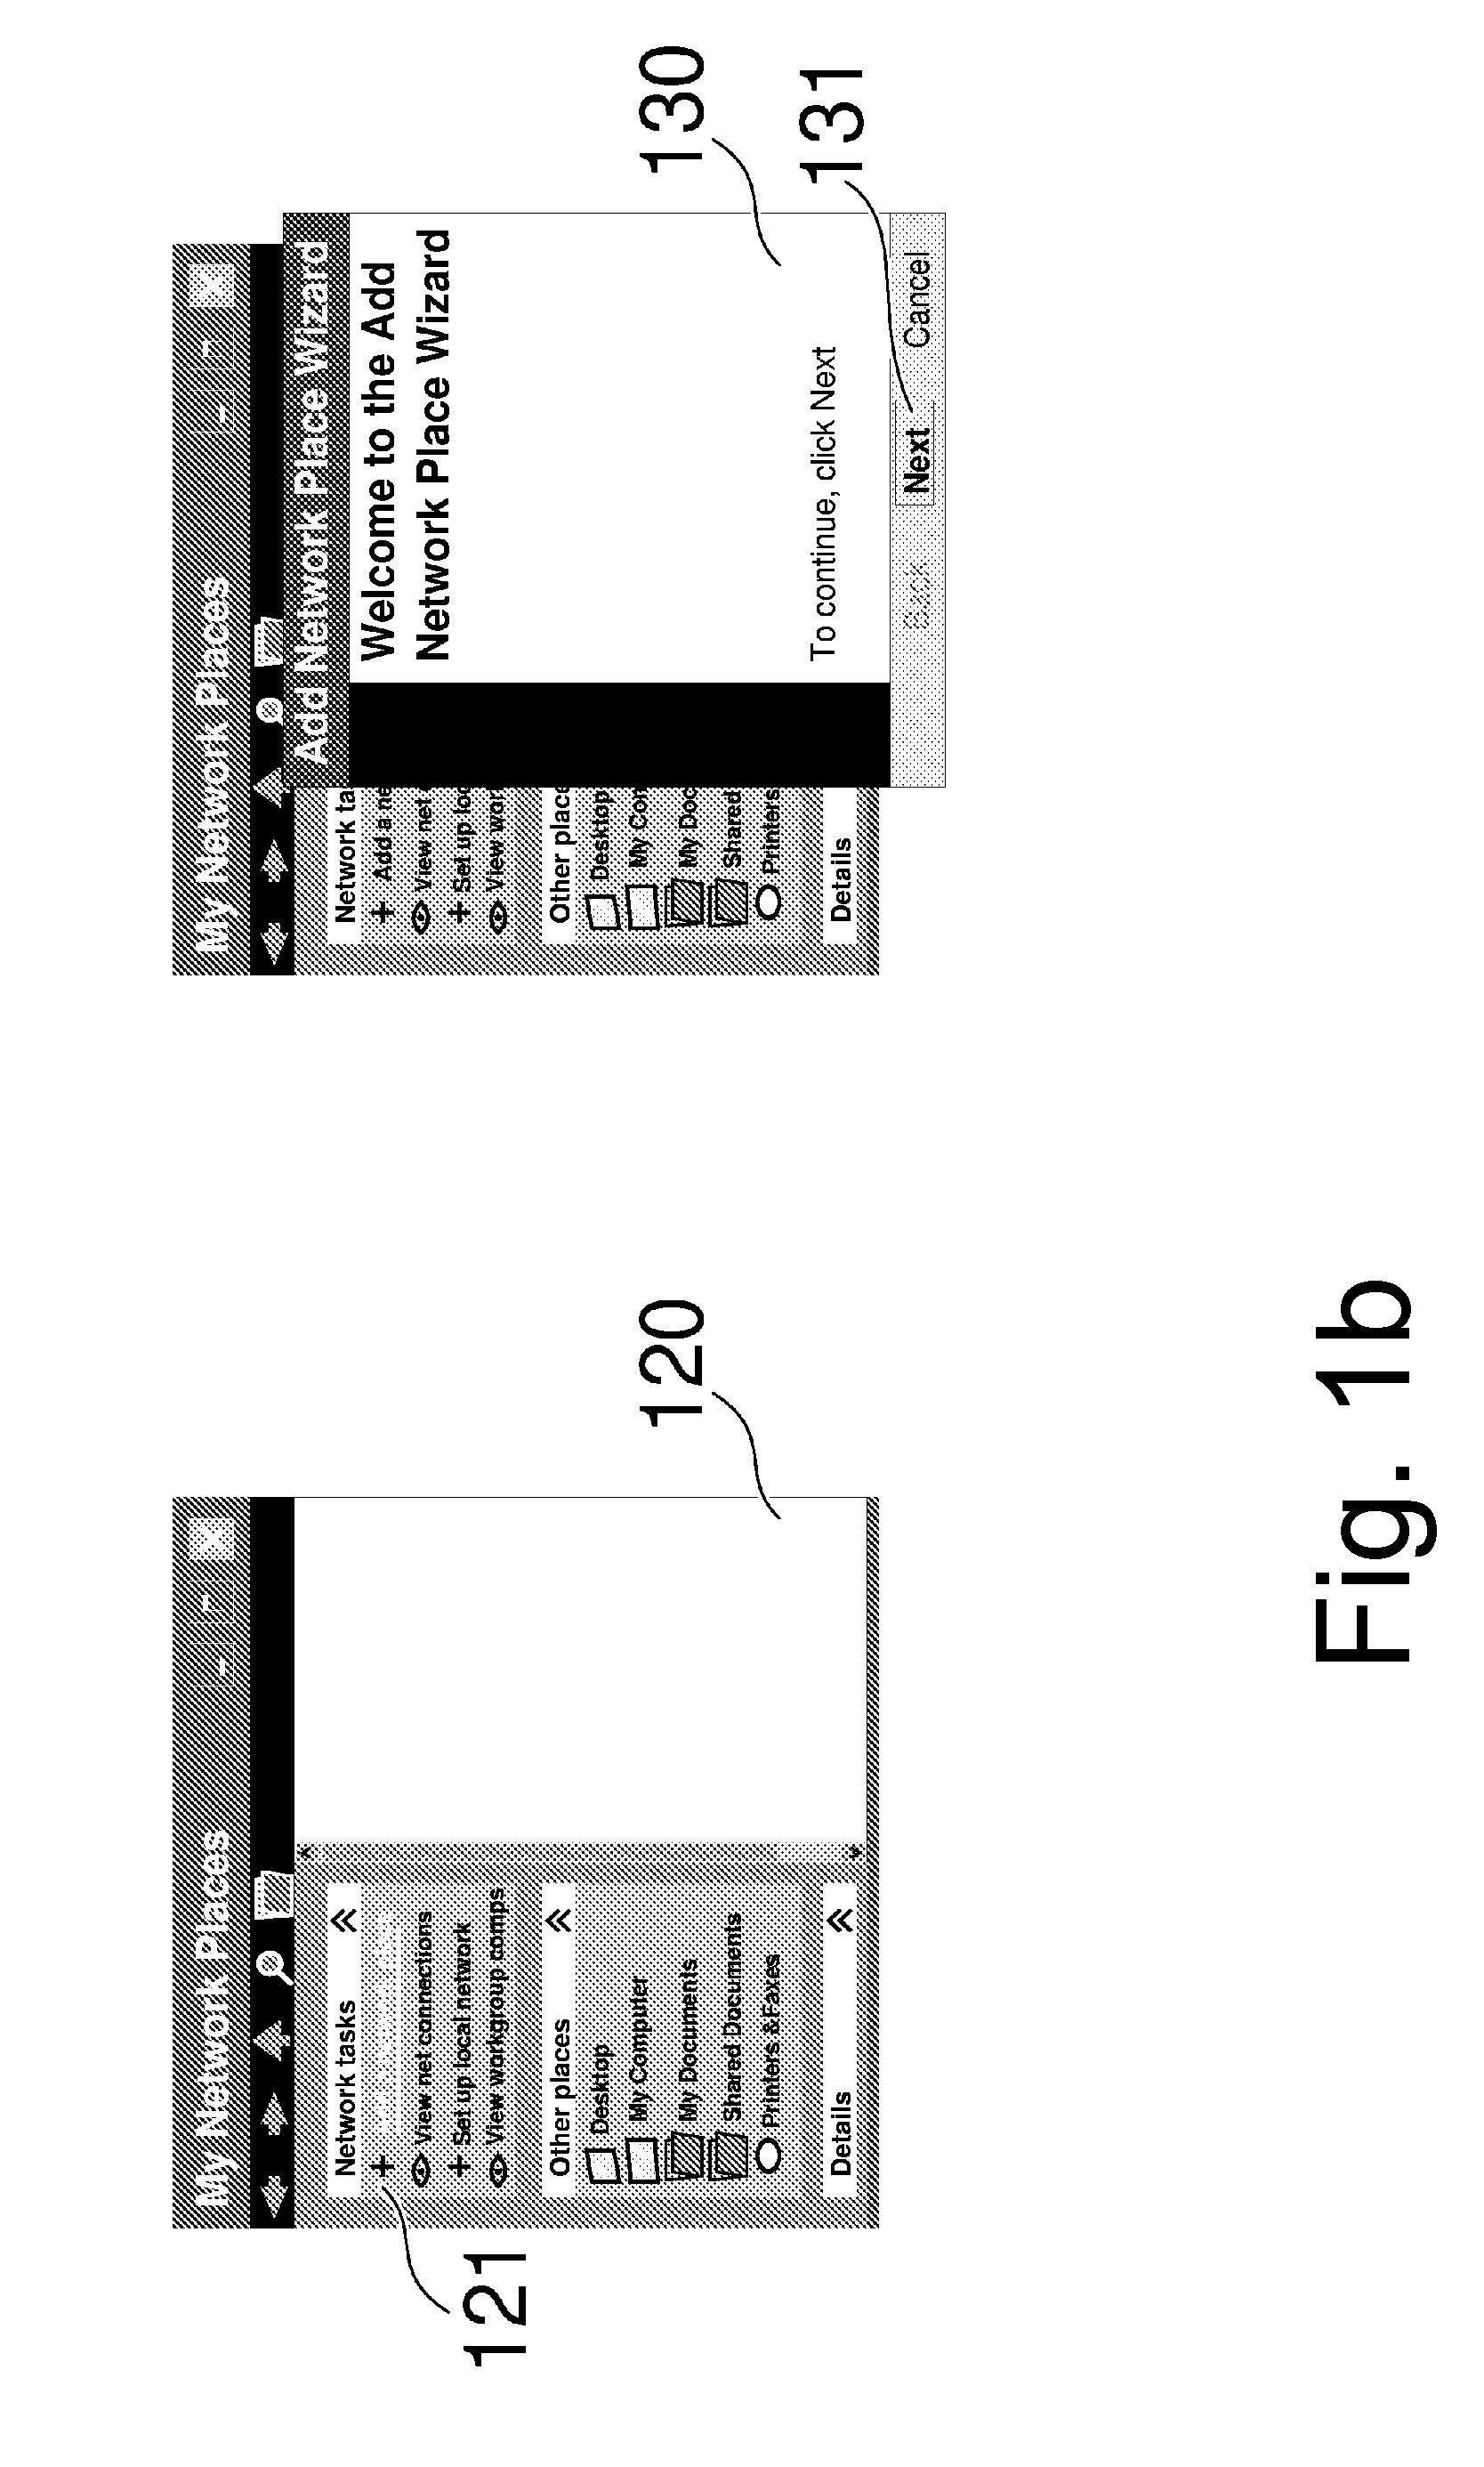 Method and System for Access to Material on a Web Site